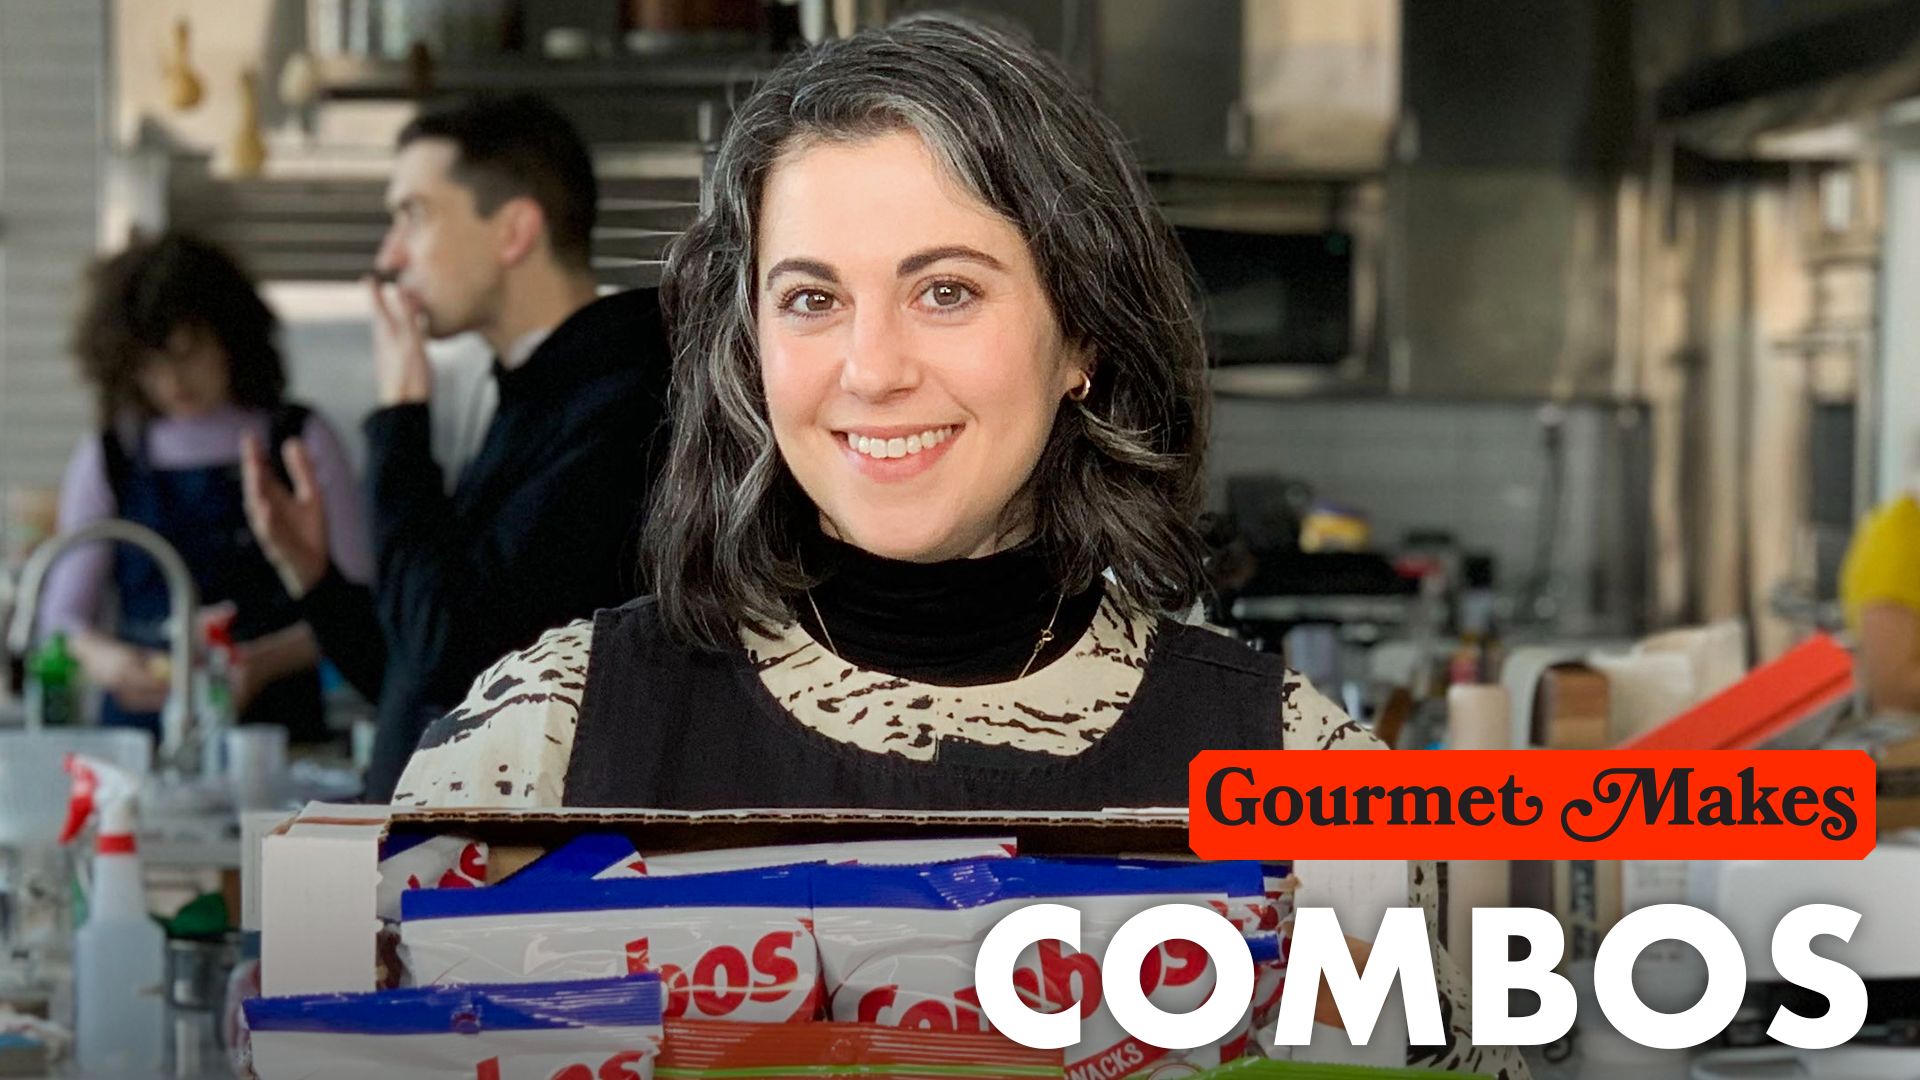 Watch Pastry Chef Attempts to Make Gourmet Combos